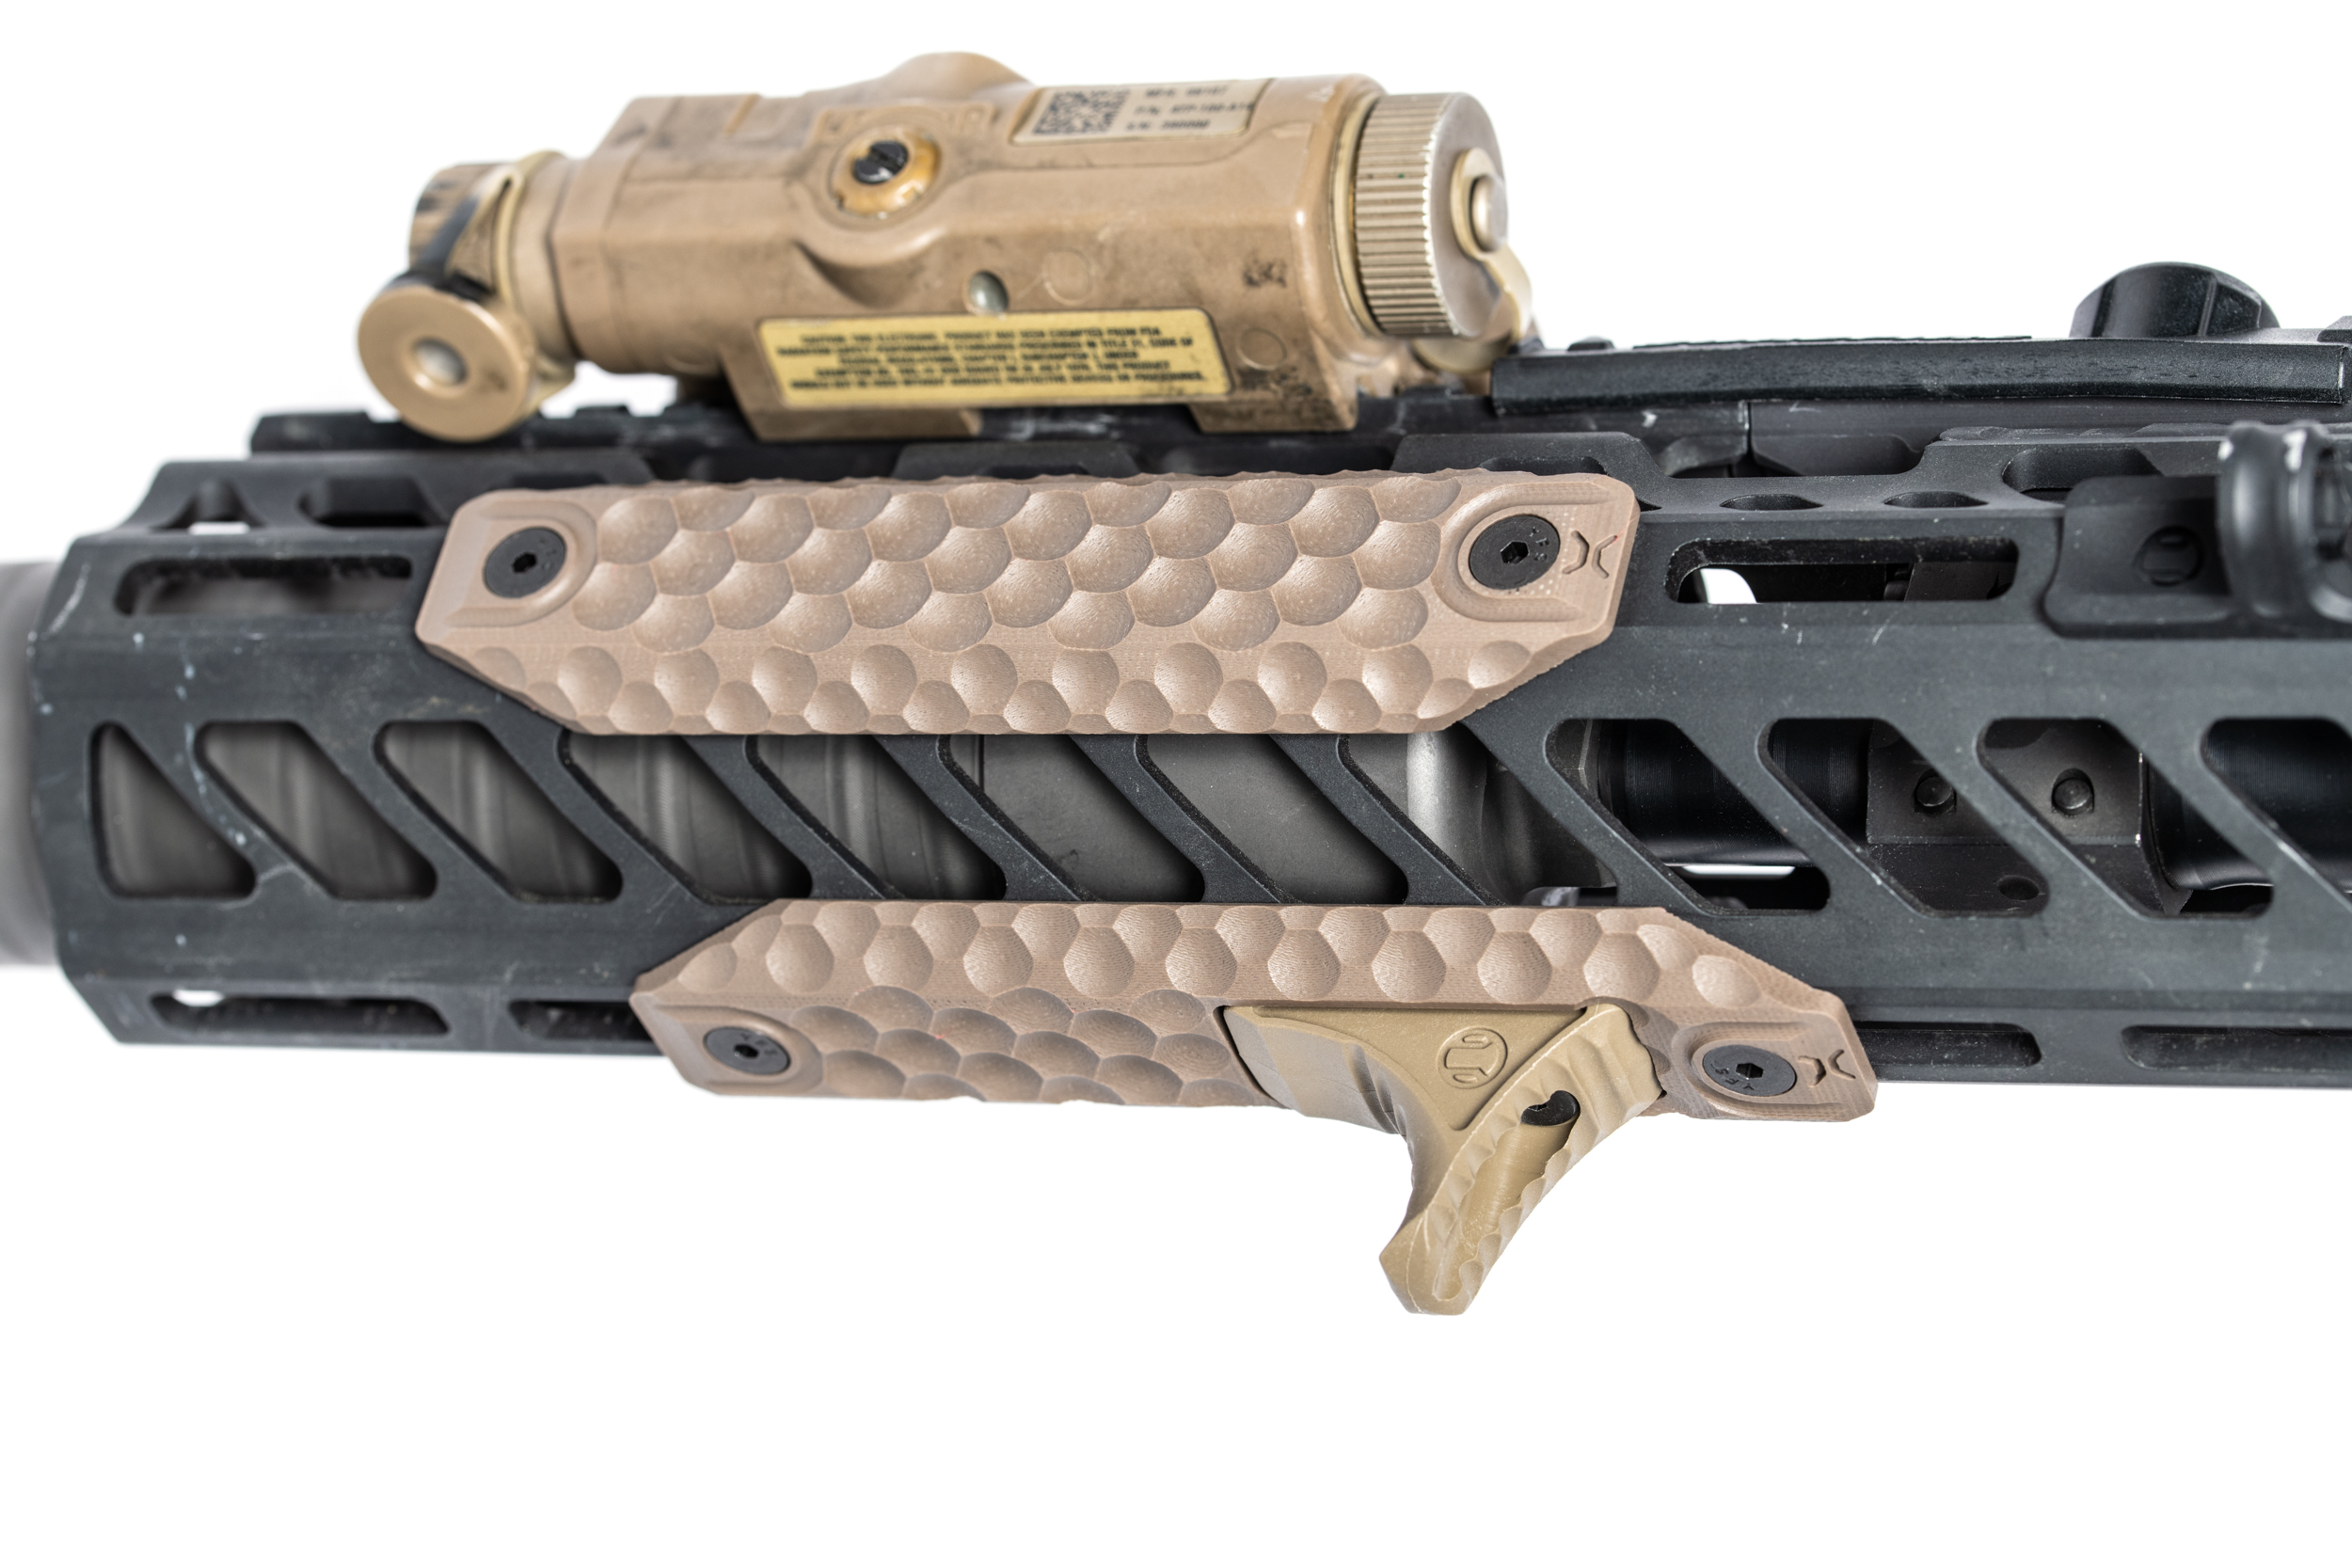 What Are The Best Ar 15 Mlok Accessories To Help Reduce Recoil